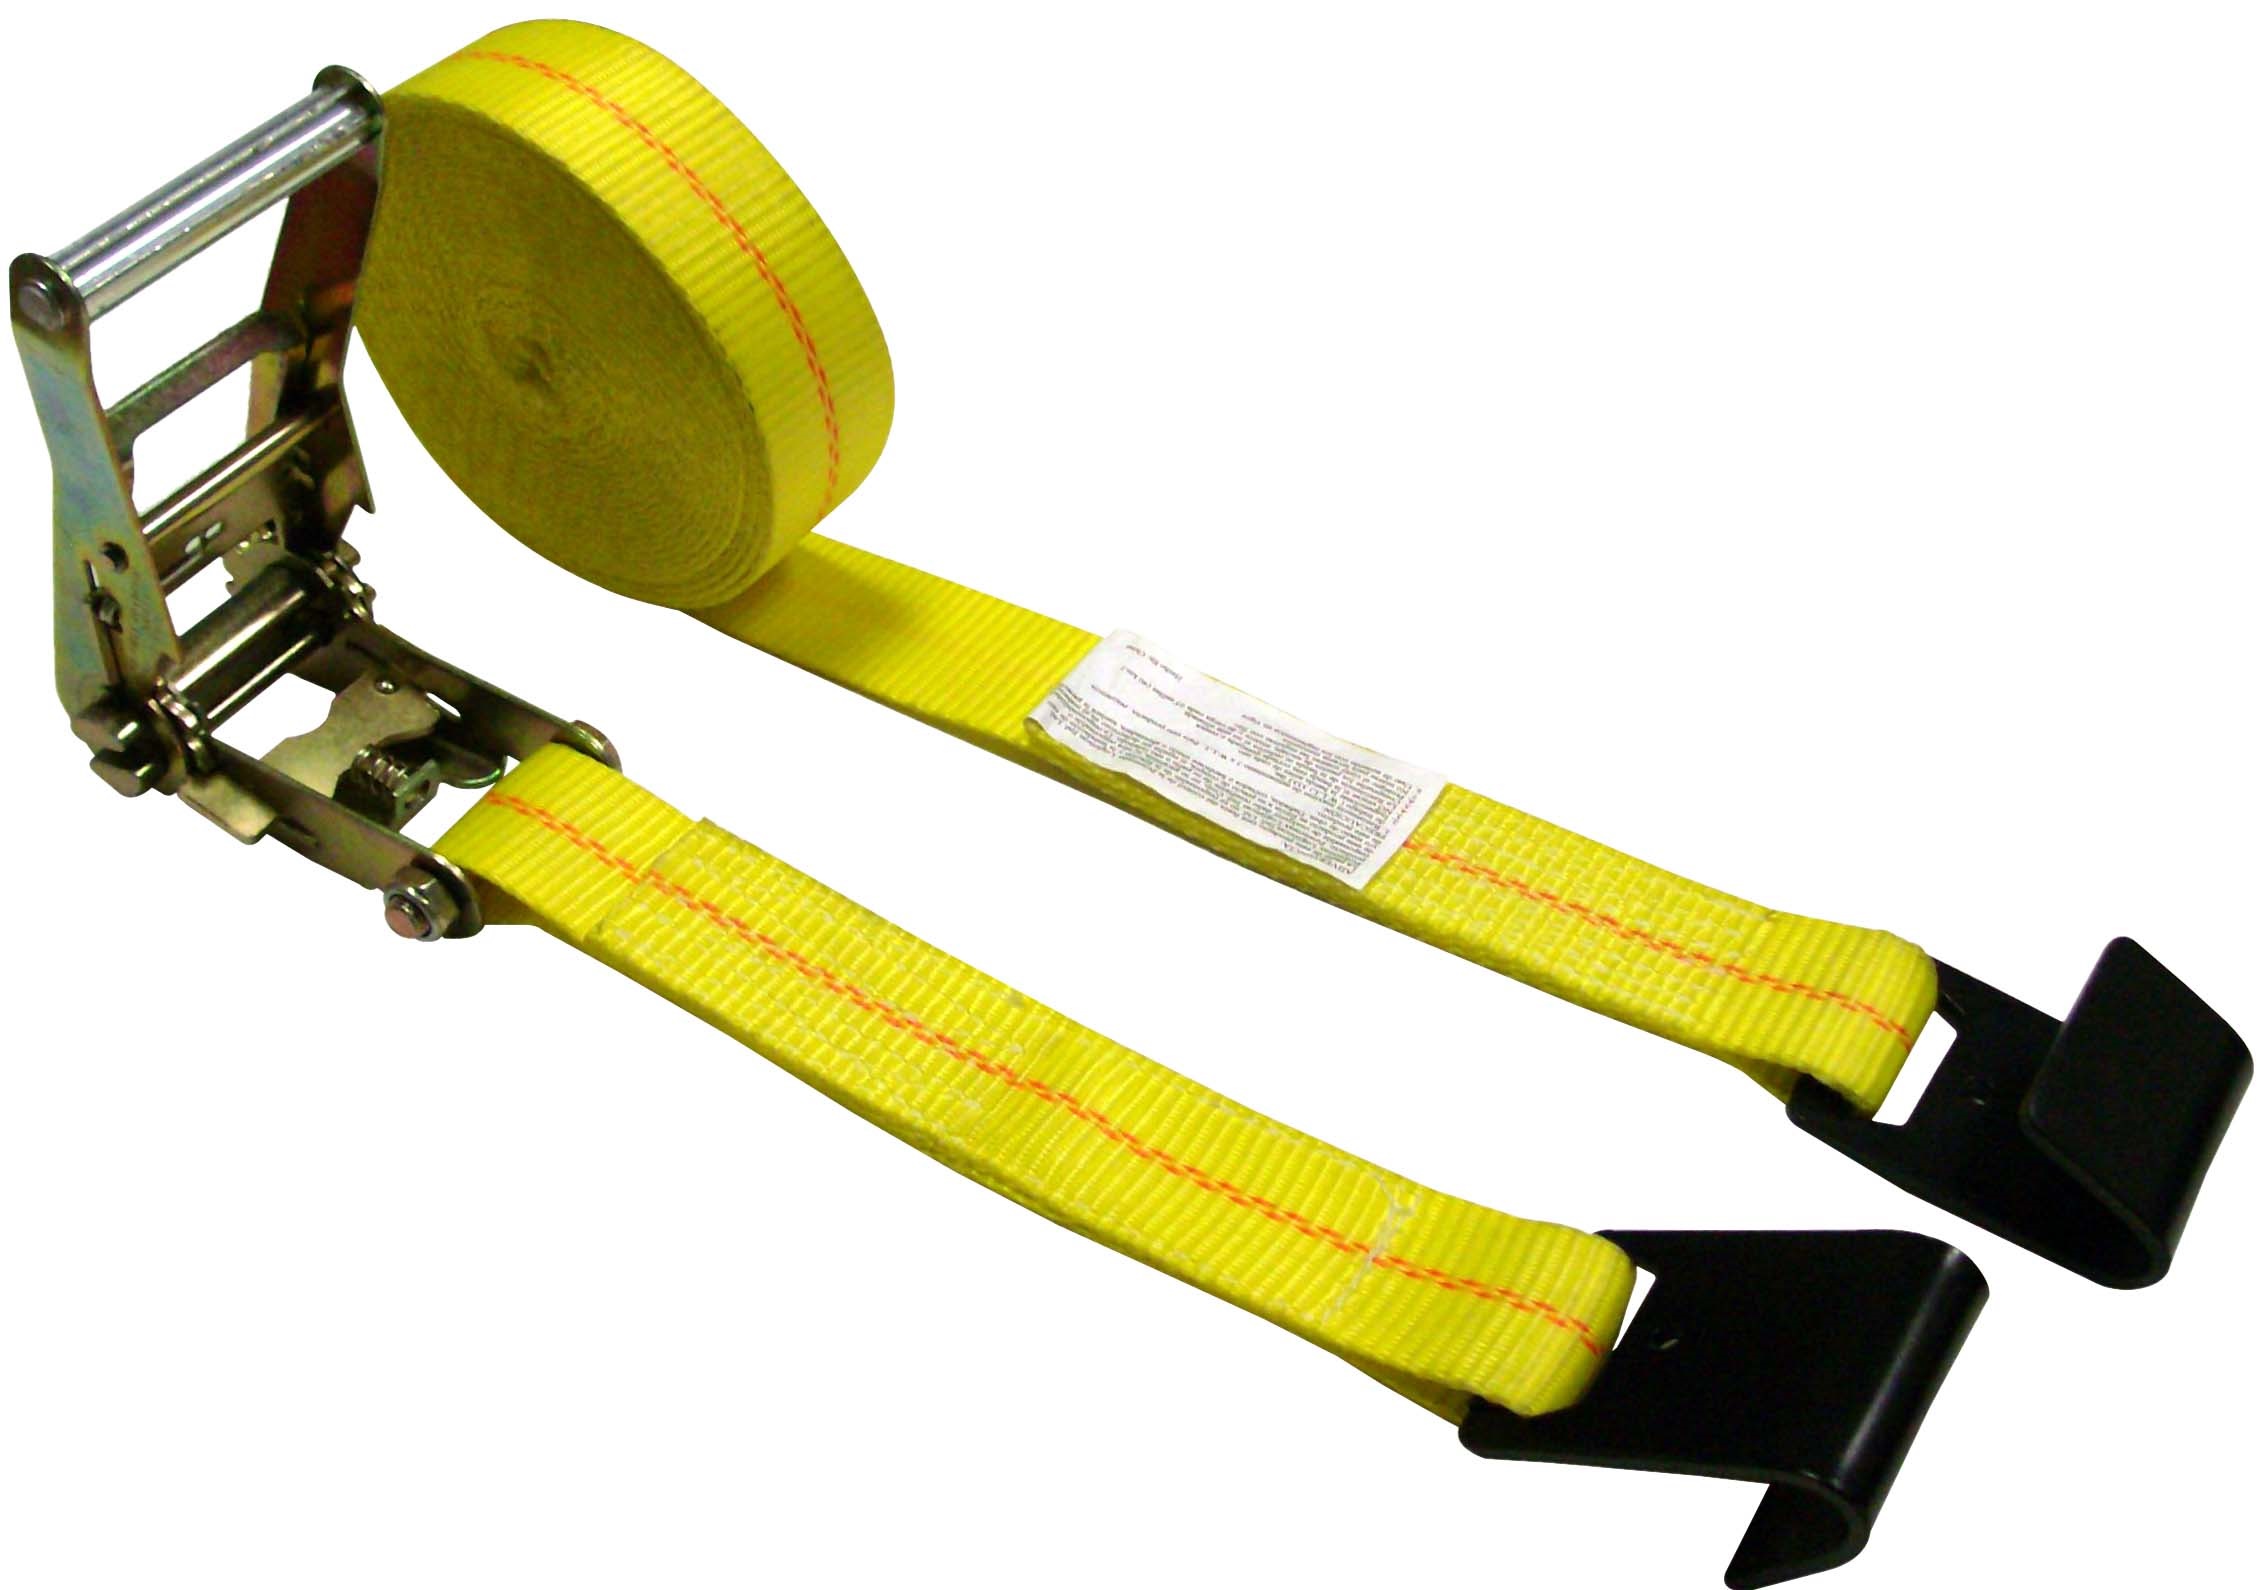 2 x 30' Ratchet Strap with Black Flat Hooks - 3,335lb WLL - MADE IN USA